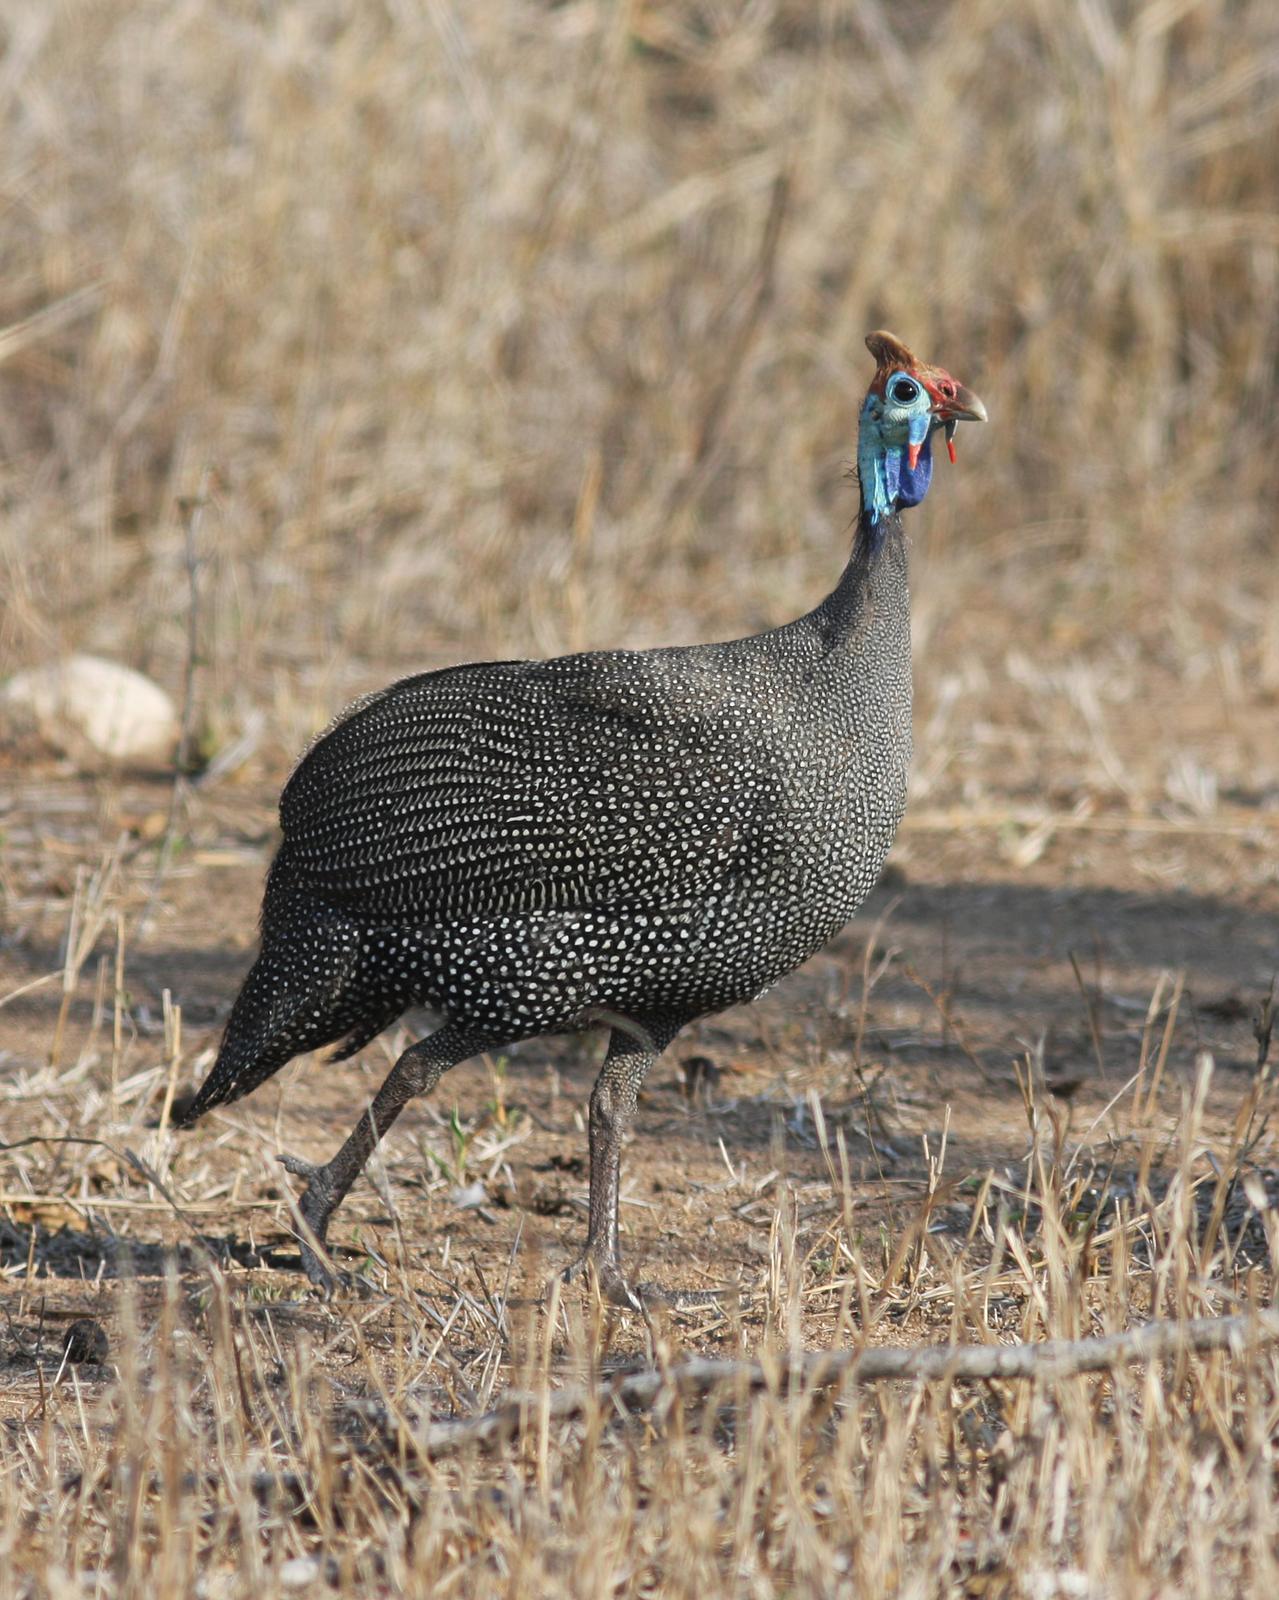 Helmeted Guineafowl Photo by Henk Baptist